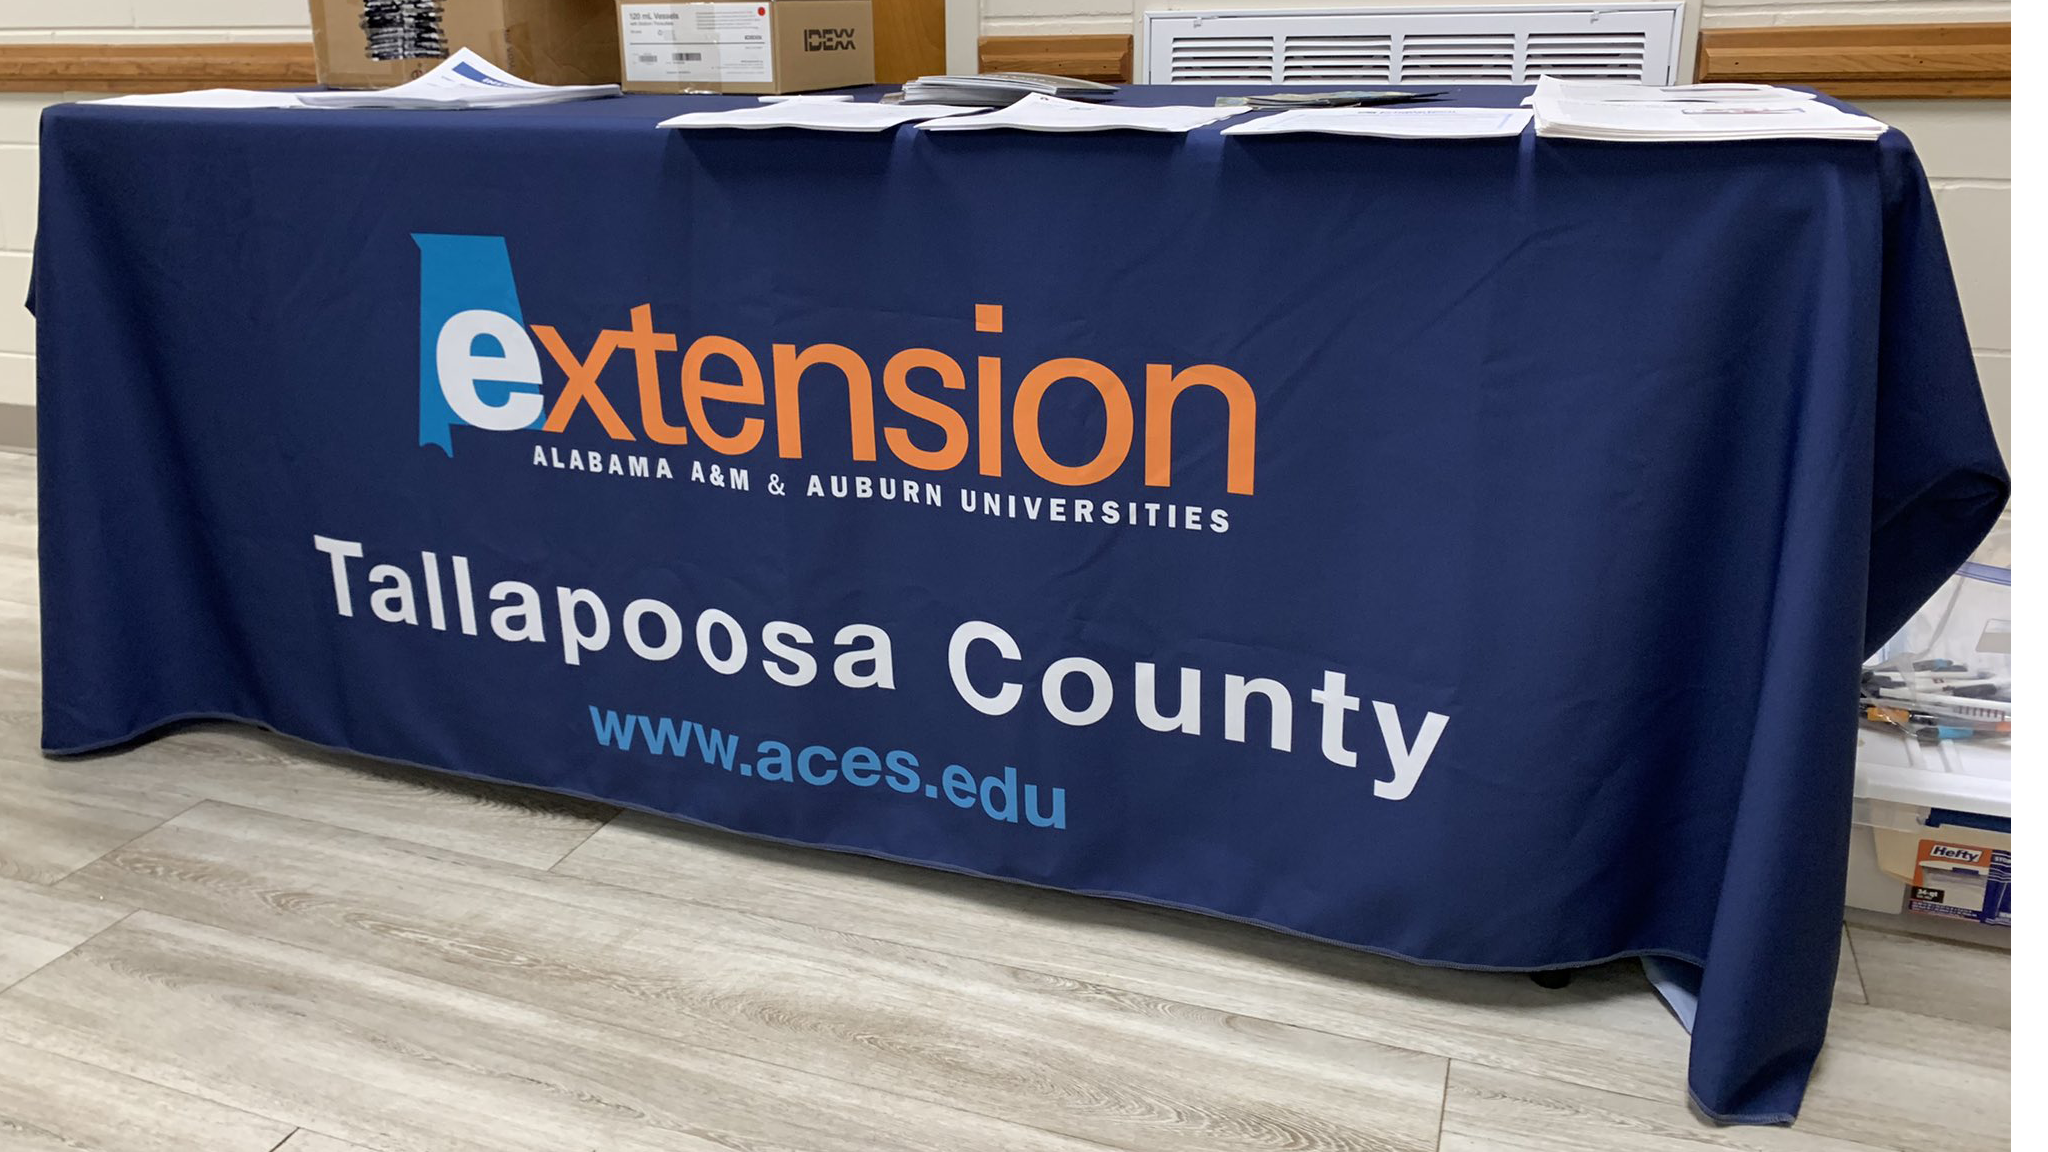 Tallapoosa County Extension Table